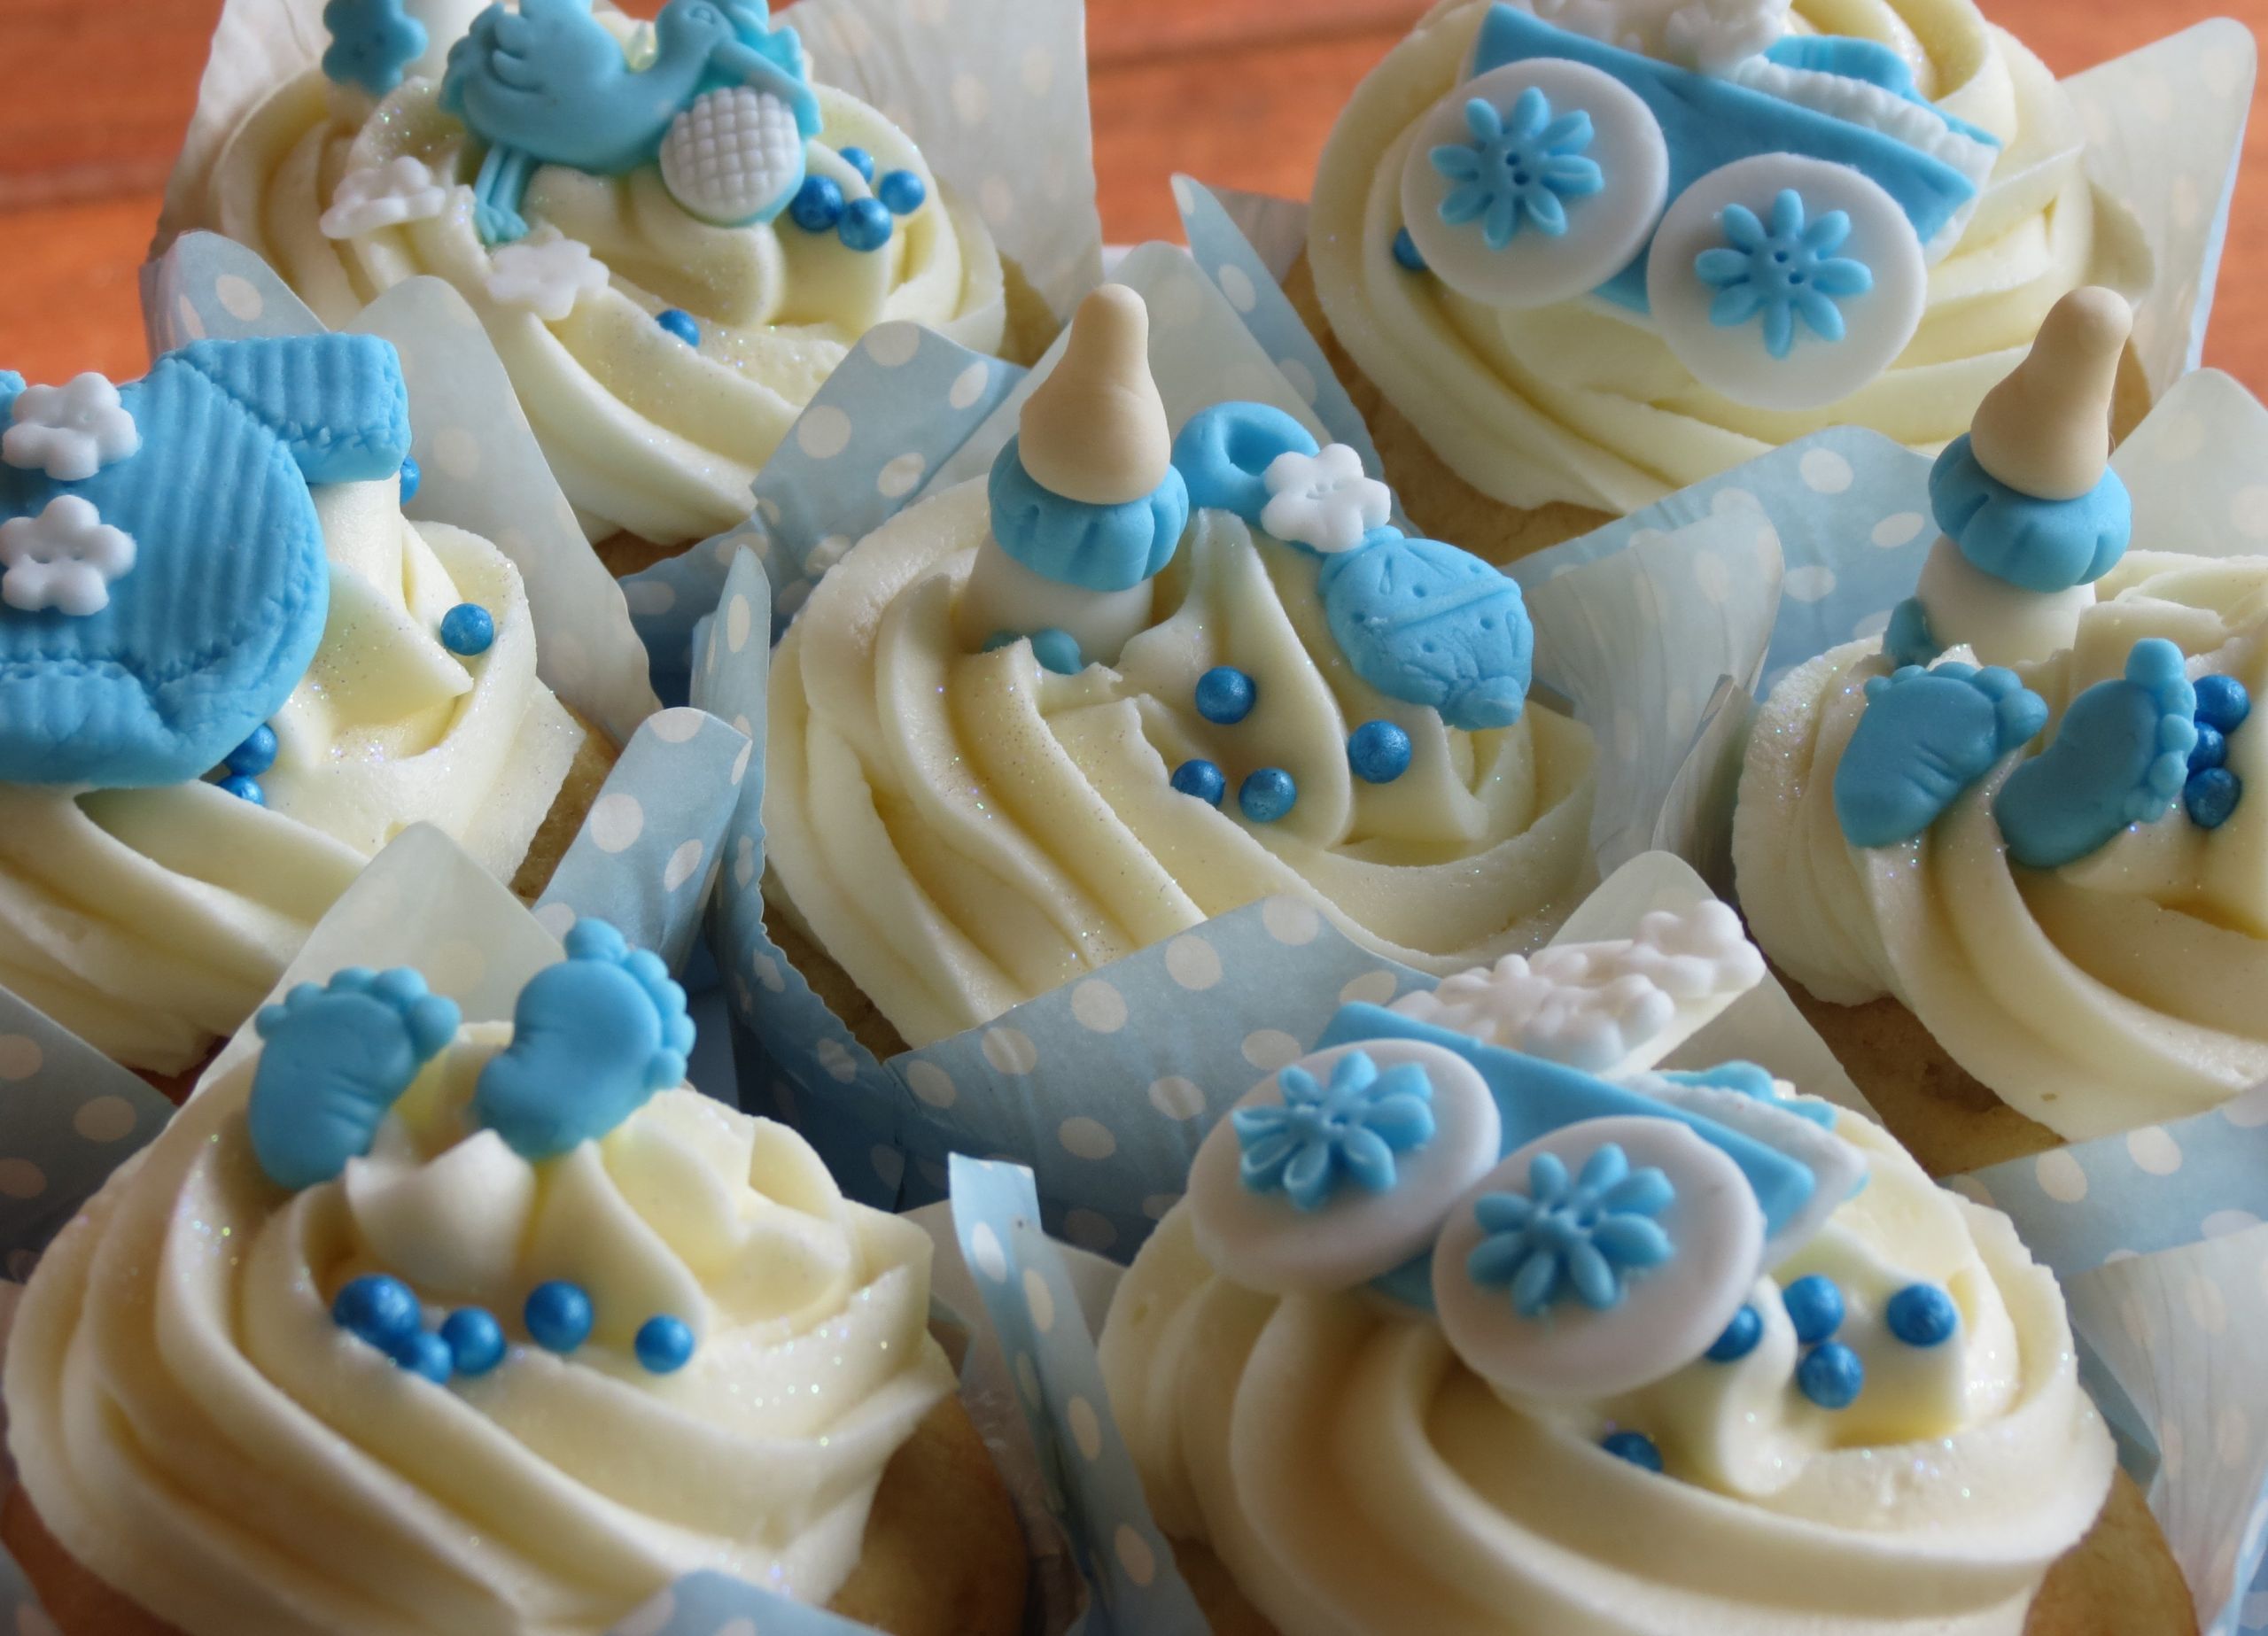 15 Of the Best Ideas for Baby Shower Cupcakes for Boys